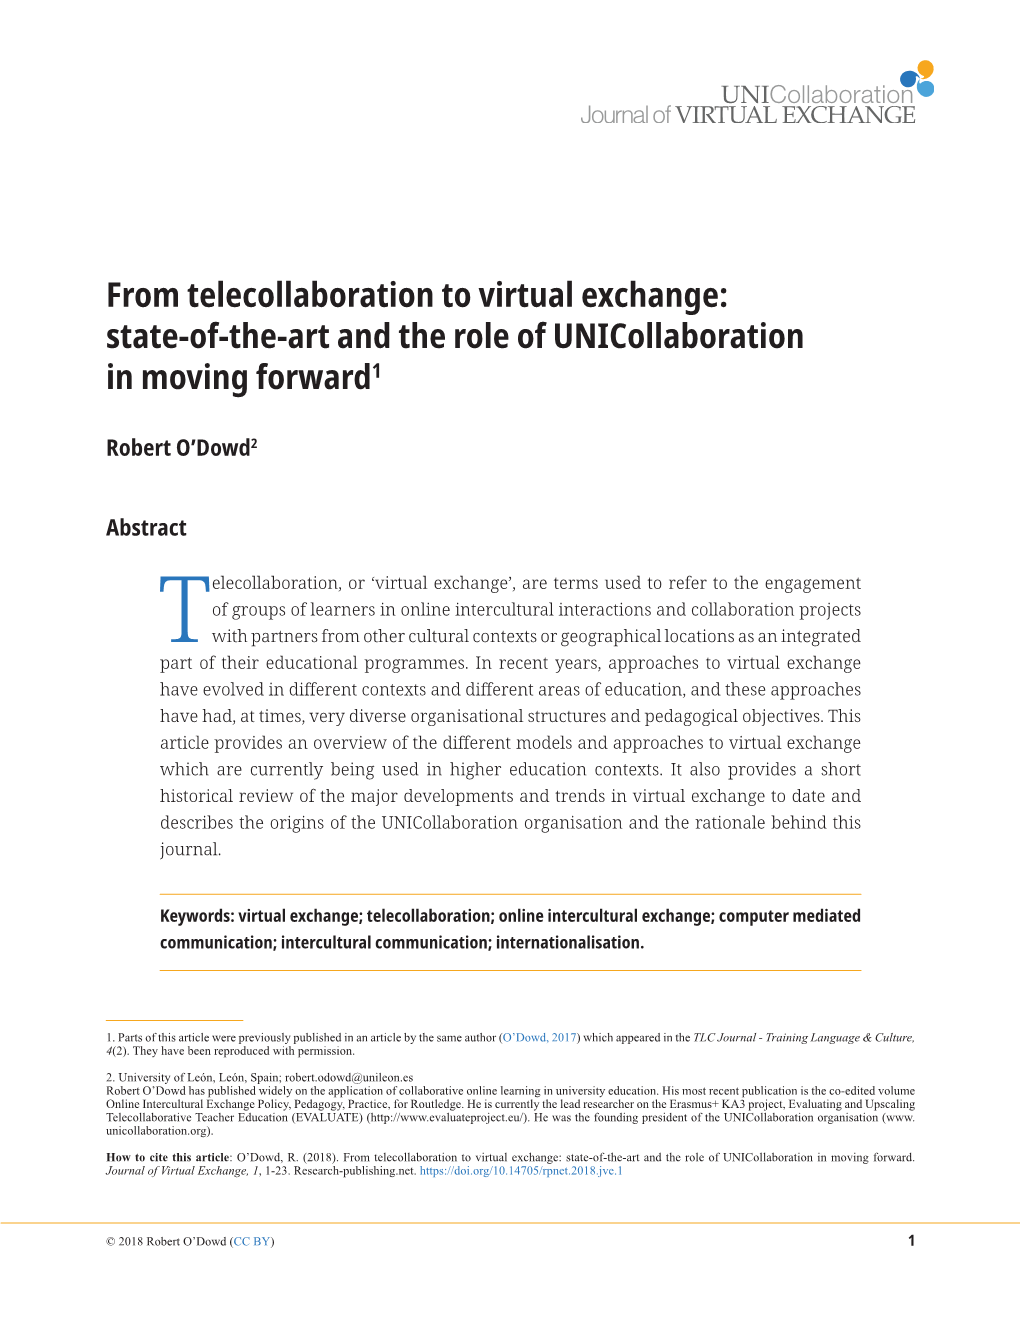 From Telecollaboration to Virtual Exchange: State-Of-The‑Art and the Role of Unicollaboration in Moving Forward1